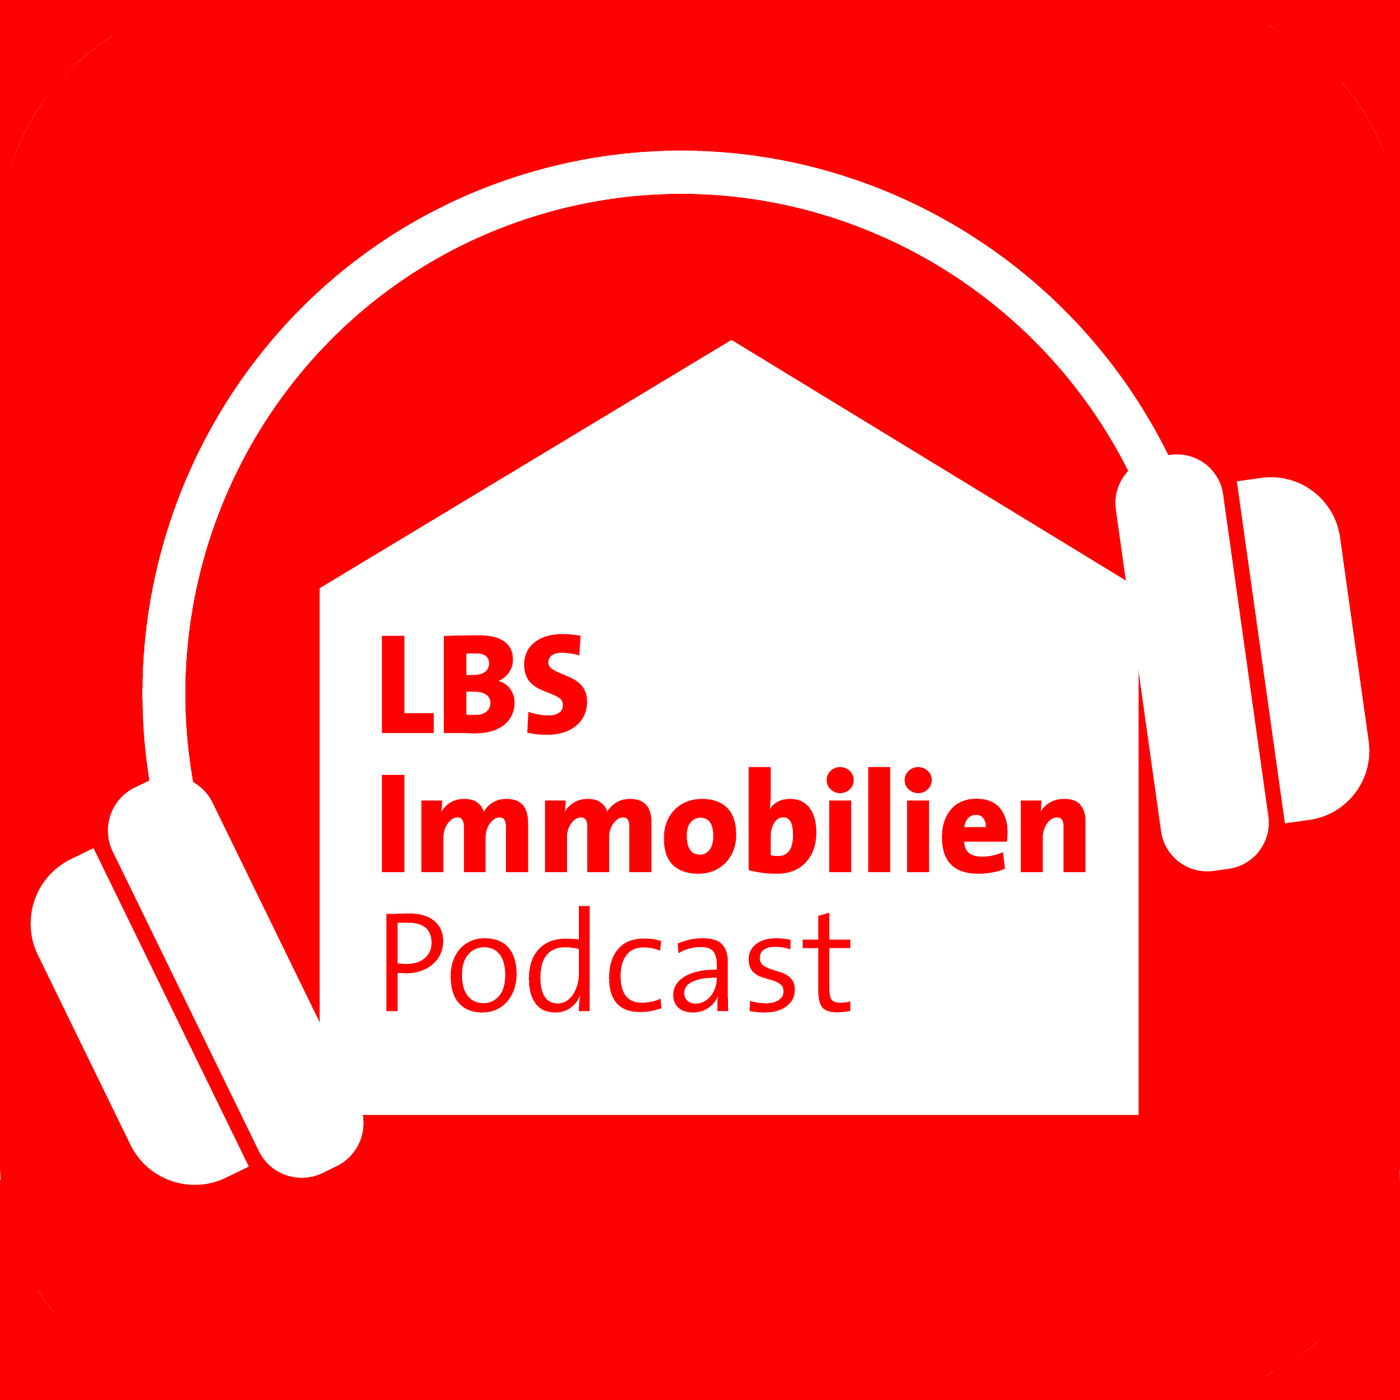 LBS Immobilien Podcast